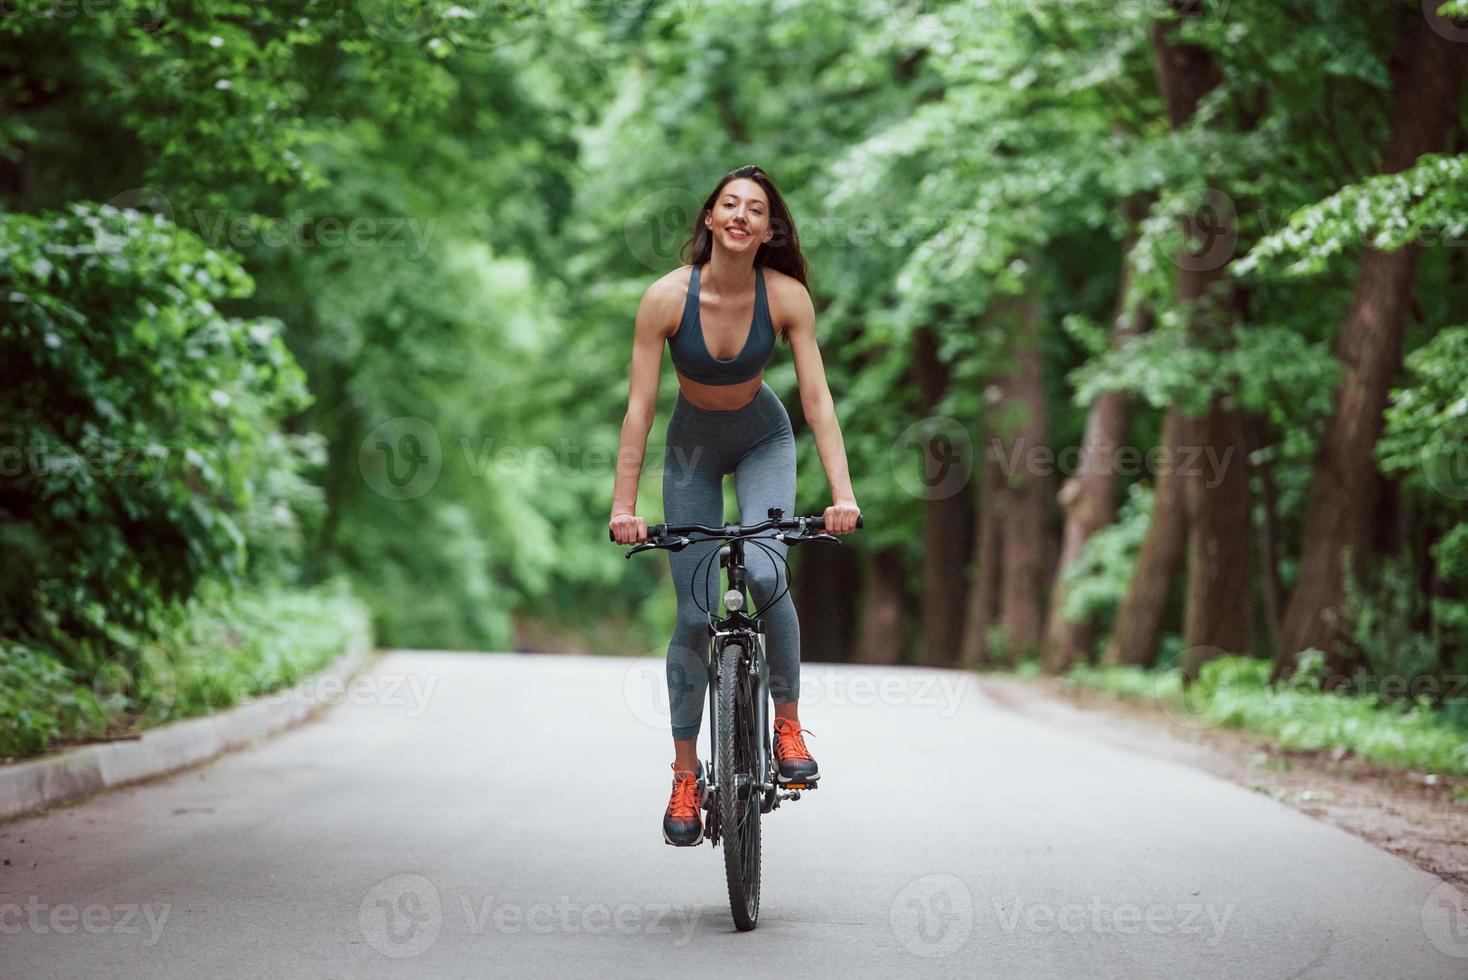 Female cyclist on a bike on asphalt road in the forest at daytime photo